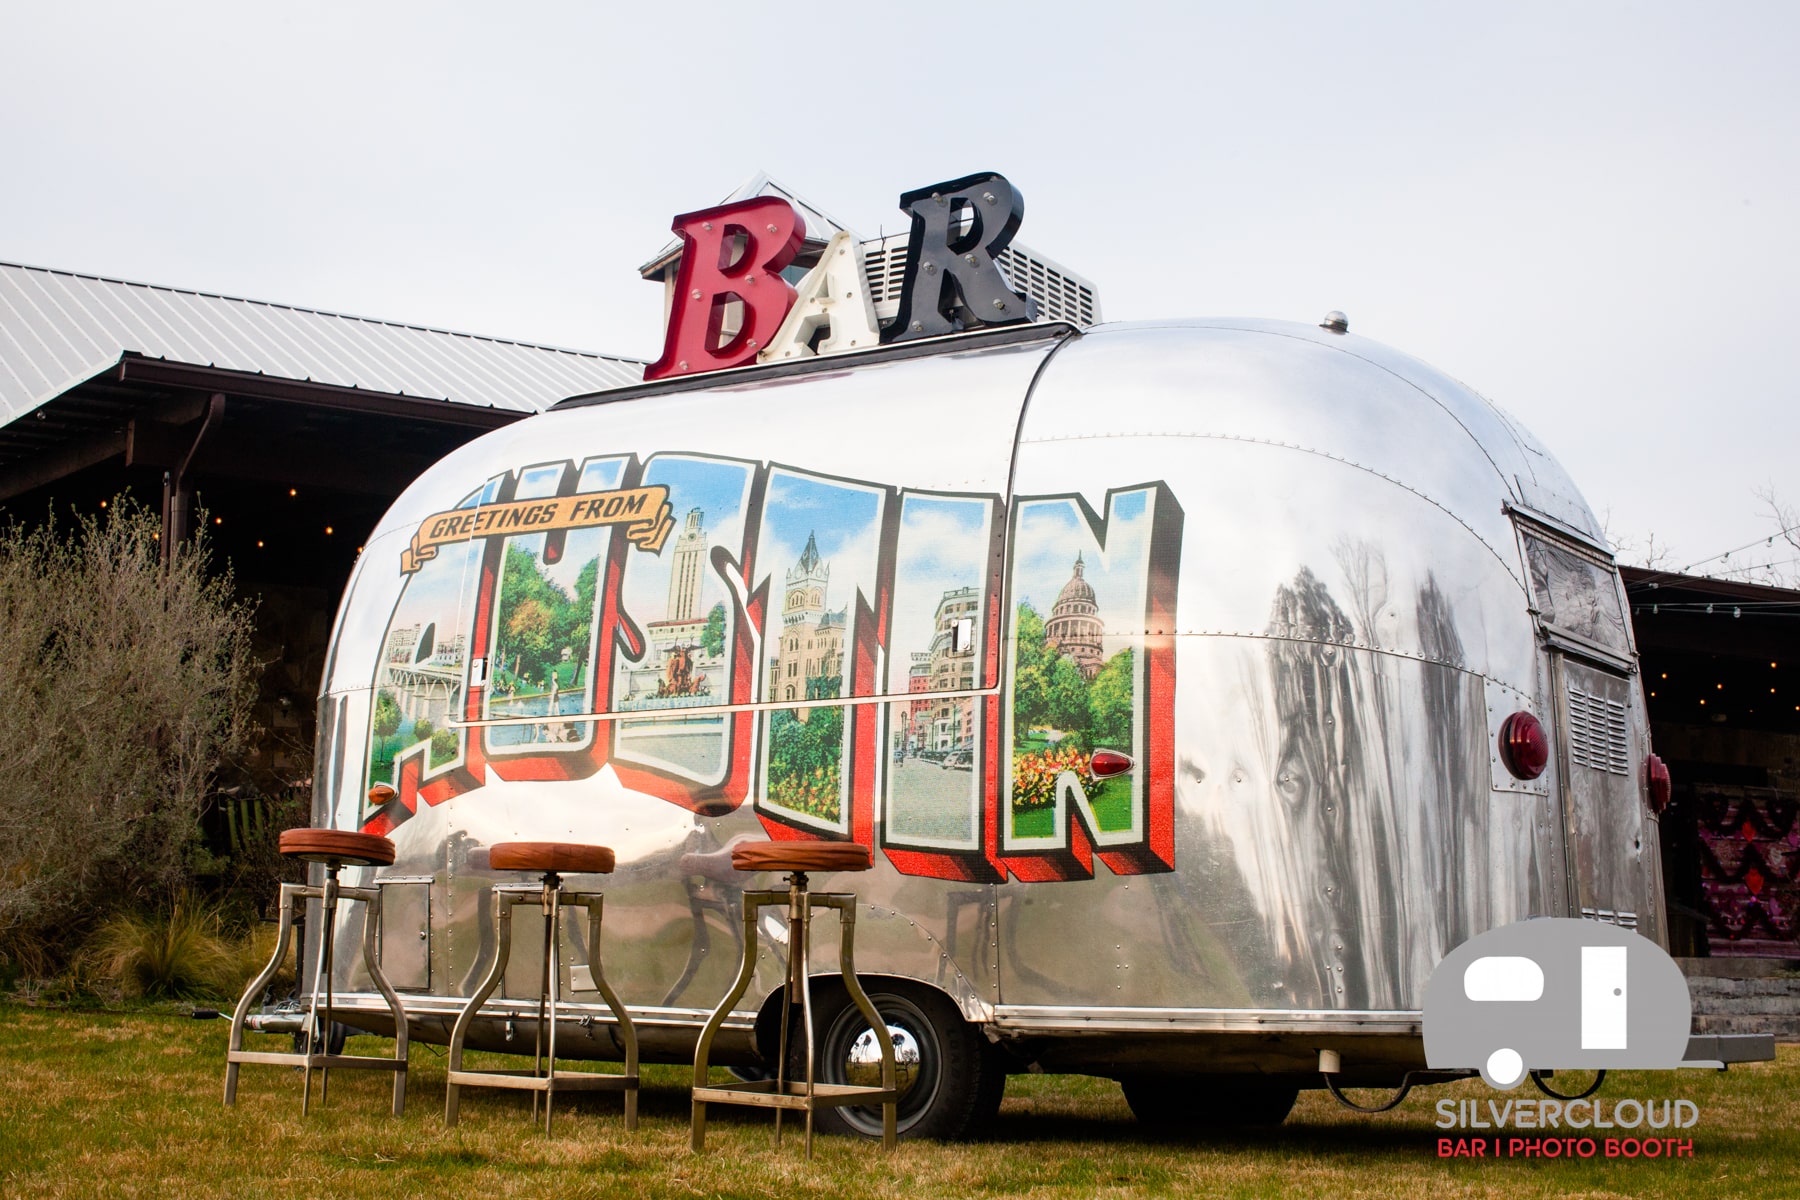 Silvercloud's Airstream Bar Trailer Featured in BizBash, the Event Pro Mag